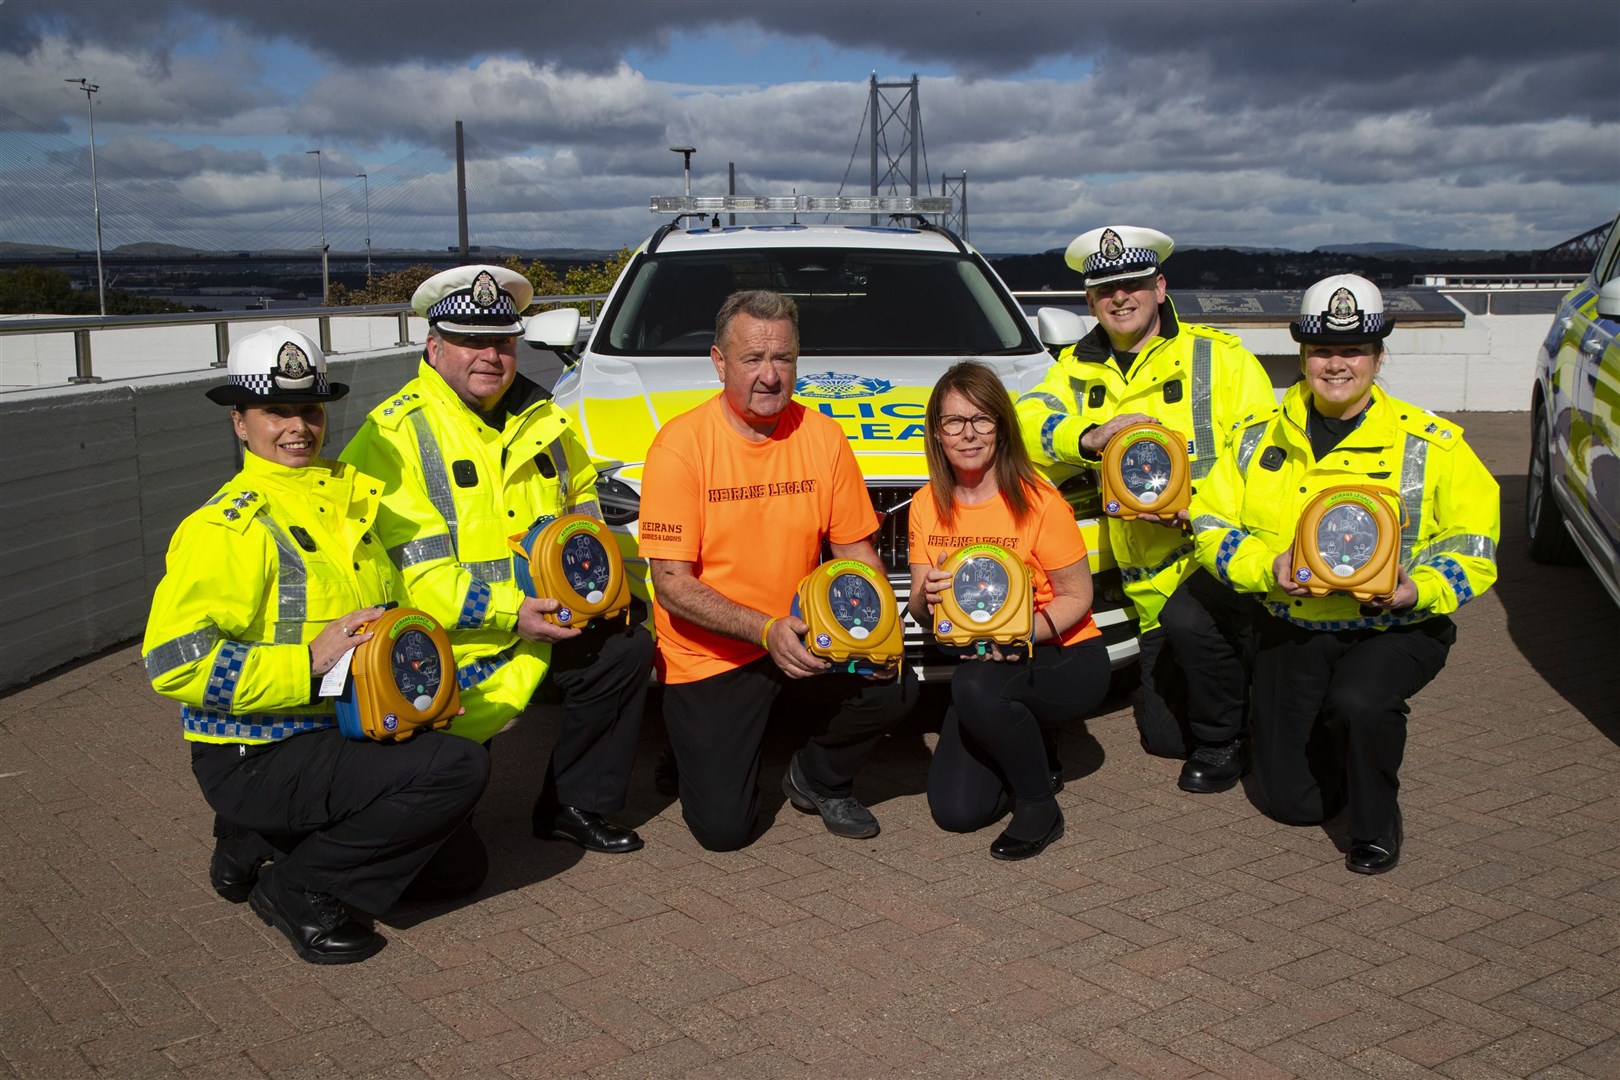 With the new defib equipment are Chief Inspector West Command Lorraine Napier, Chief Inspector East Command Andy Gibb, Gordon McKandie, Sandra McKandie, Chief Inspector North Andy Barclay and Chief Superintendent Louise Blakelock.